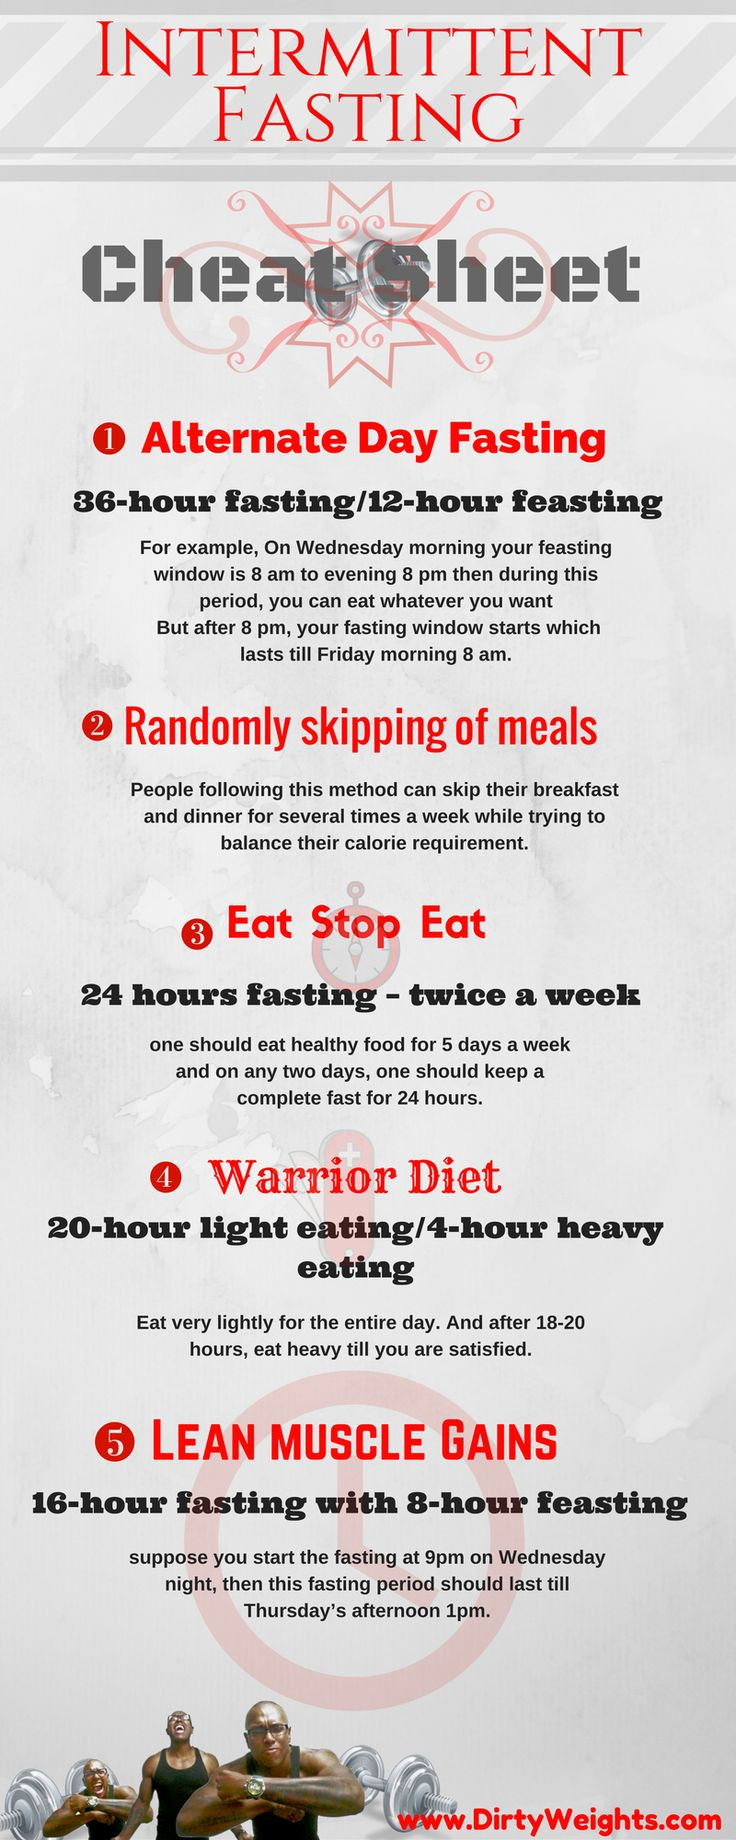 Keto Diet Intermittent Fasting
 102 best Intermittent Fasting images on Pinterest